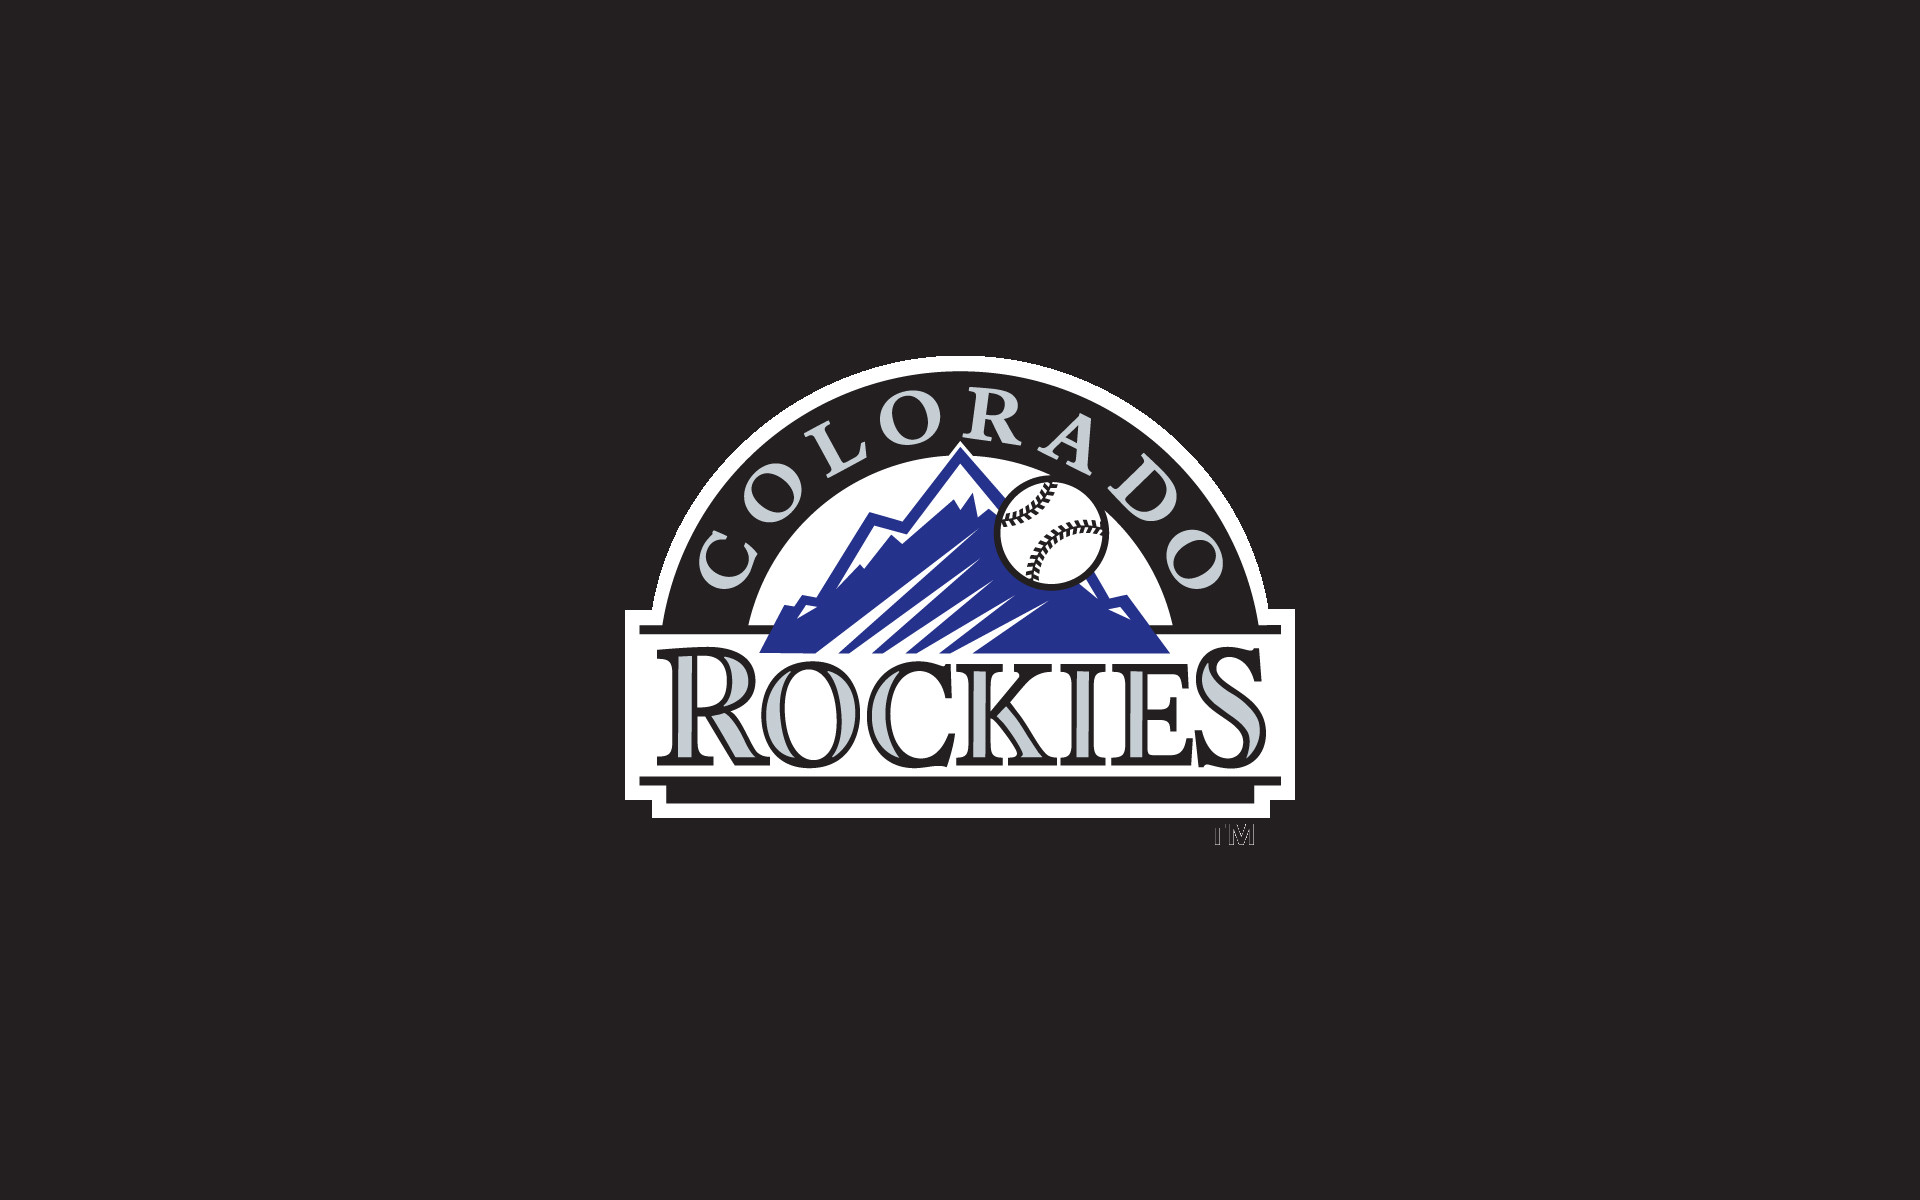 1920x1200 Related Wallpapers from CowBoys Wallpaper. Colorado Rockies Wallpaper